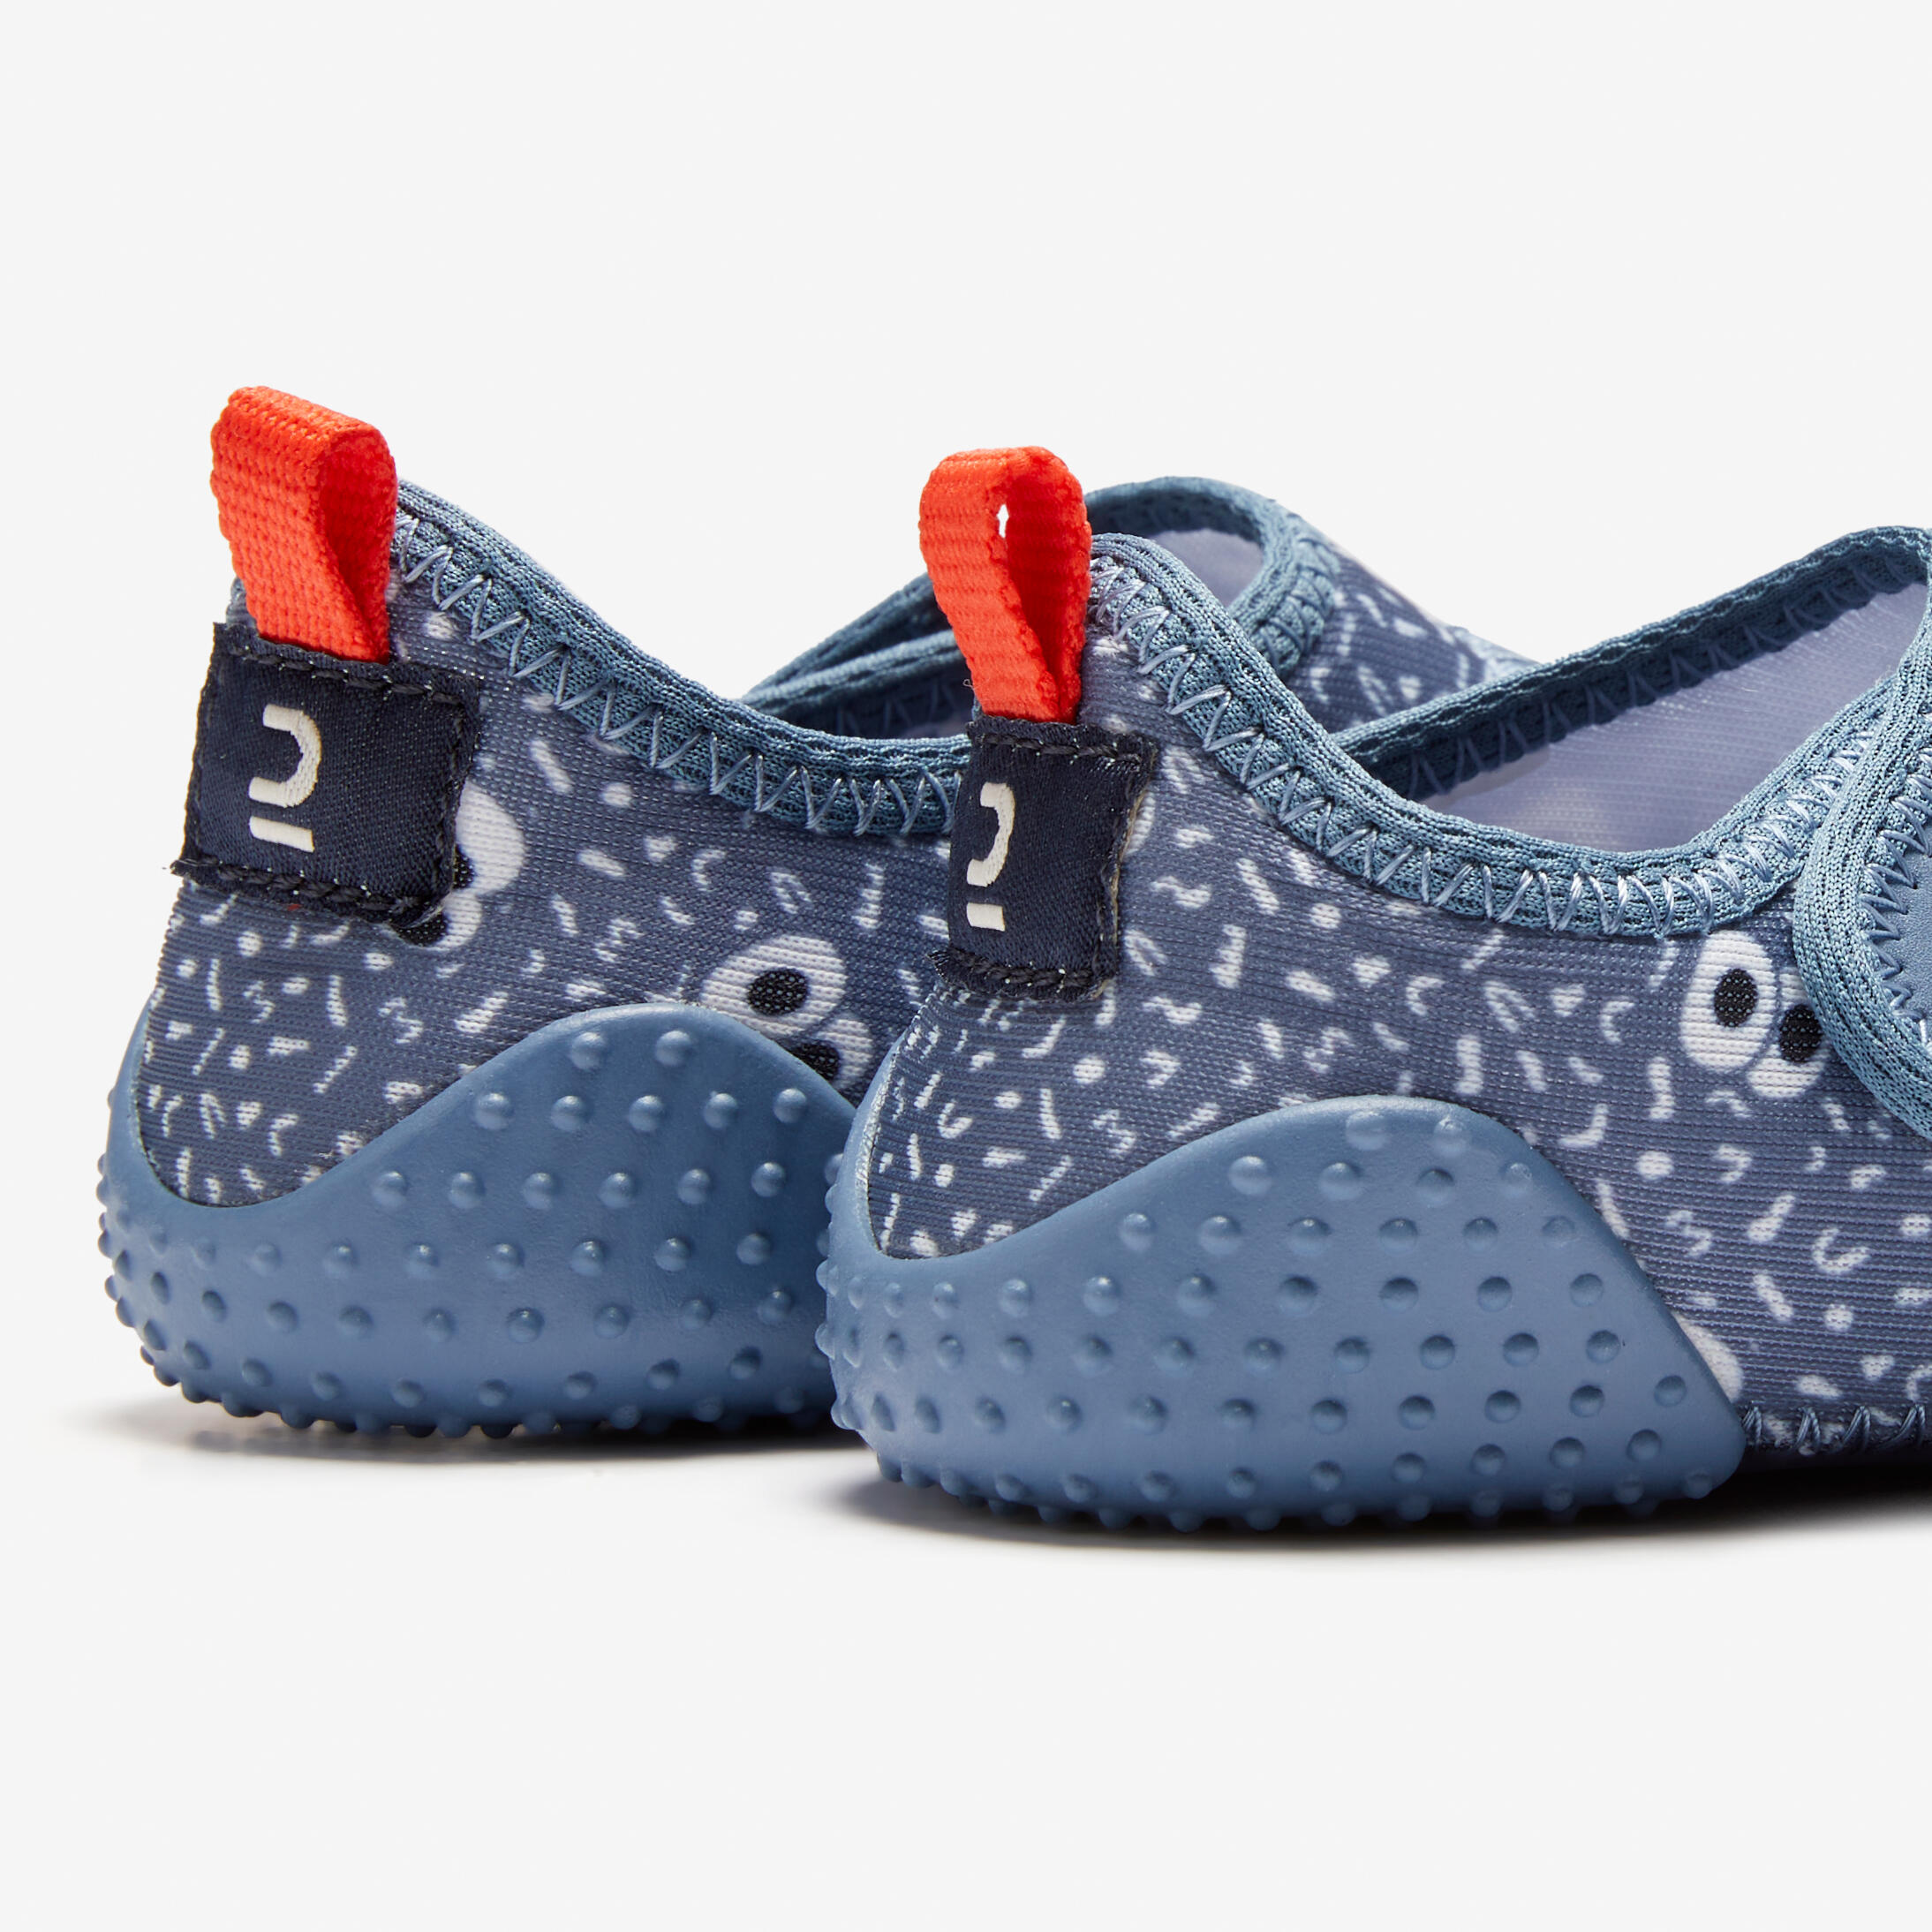 Kids' Non-Slip and Breathable Bootee - Patterns 6/8